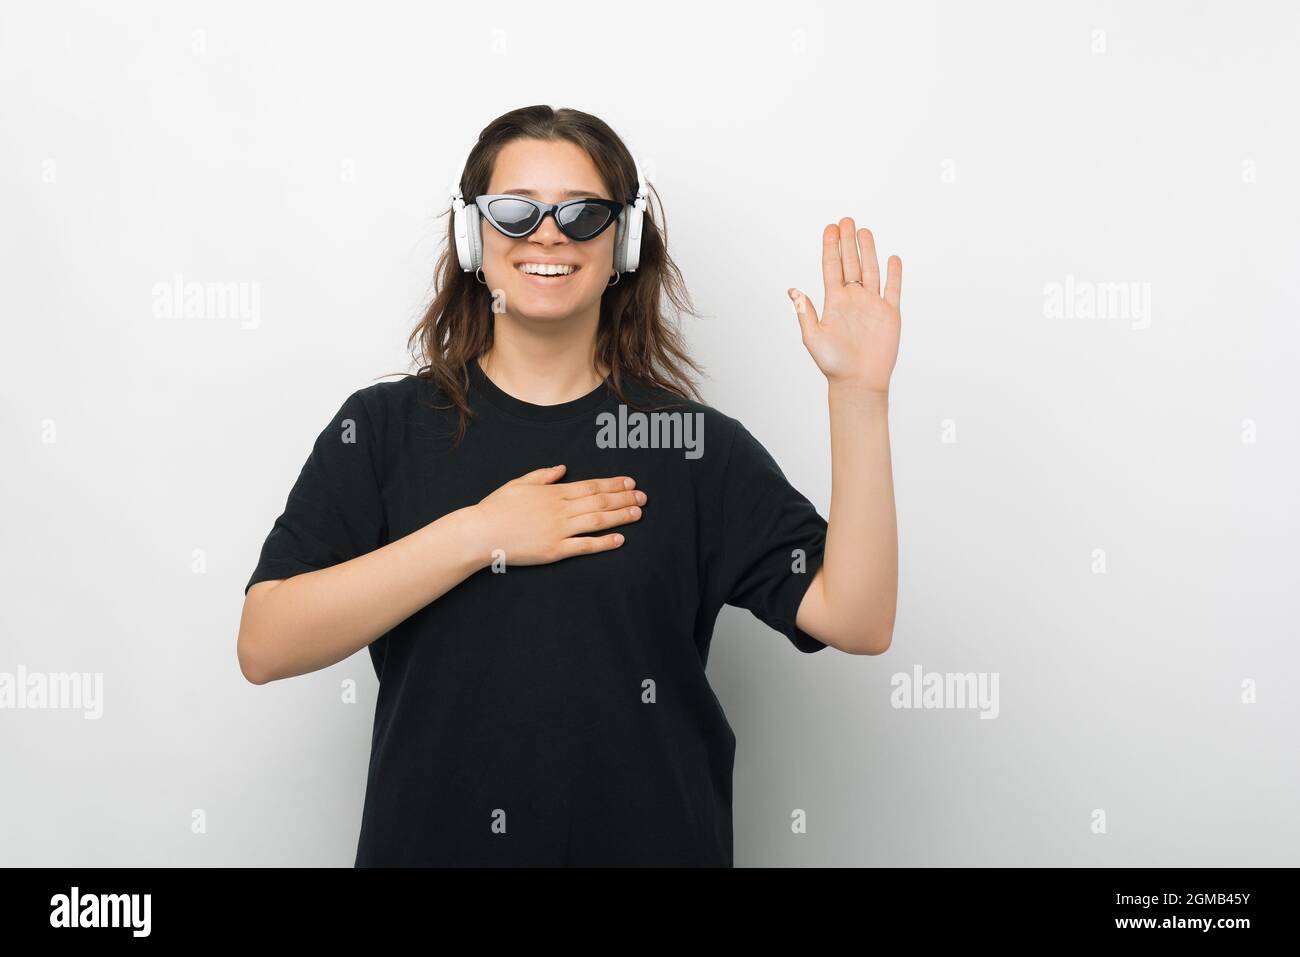 Young woman is making the promise or swear gesture while wearing headphones and sunglasses over white background. Stock Photo